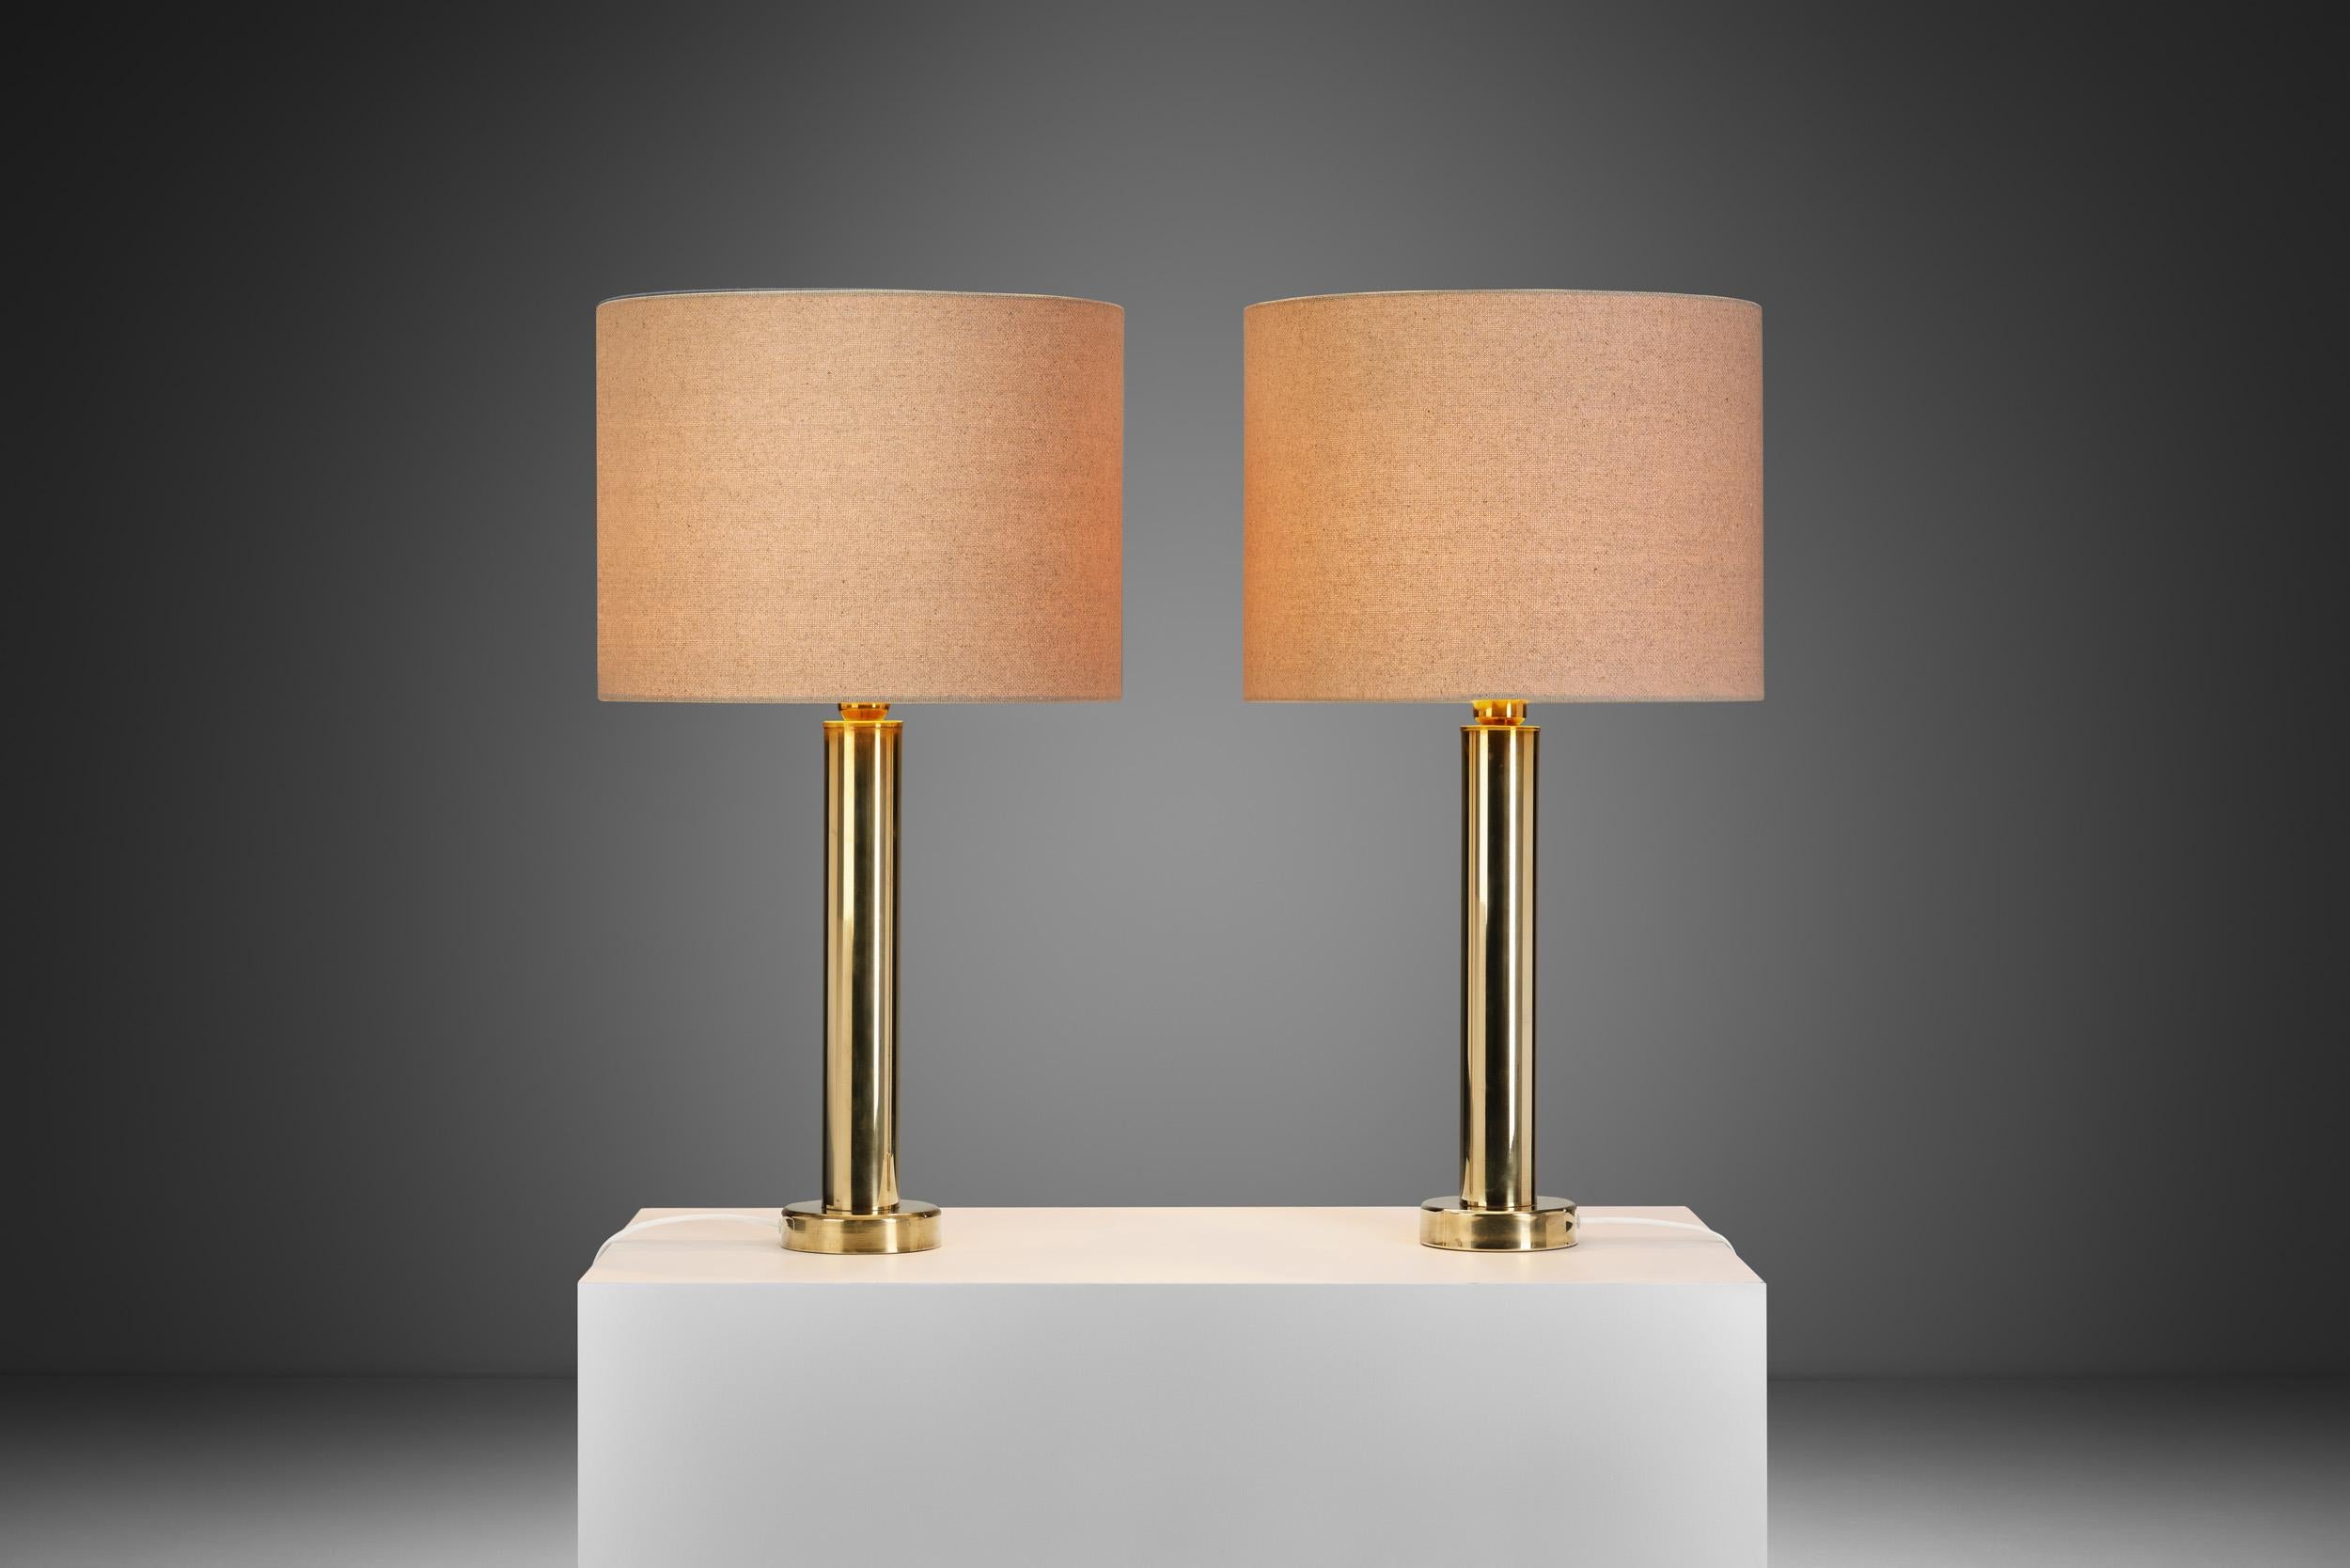 Large Swedish Modern Brass Table Lamps by Kosta Elarmatur, Sweden ca 1960s In Good Condition For Sale In Utrecht, NL